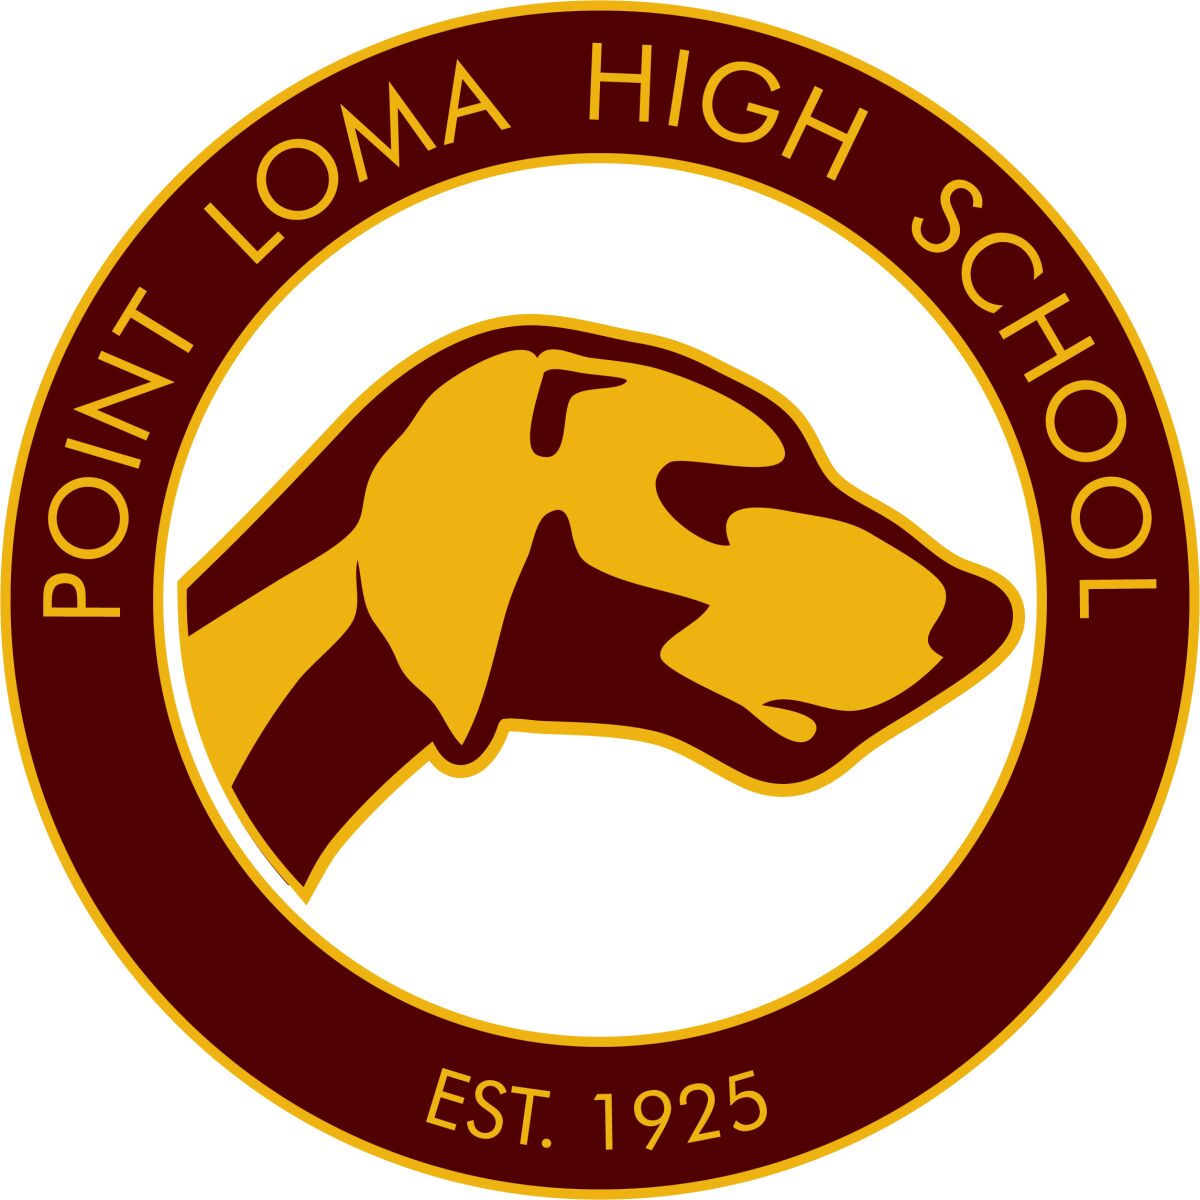 Point Loma High School's logo features the school’s mascot, the Pointer.